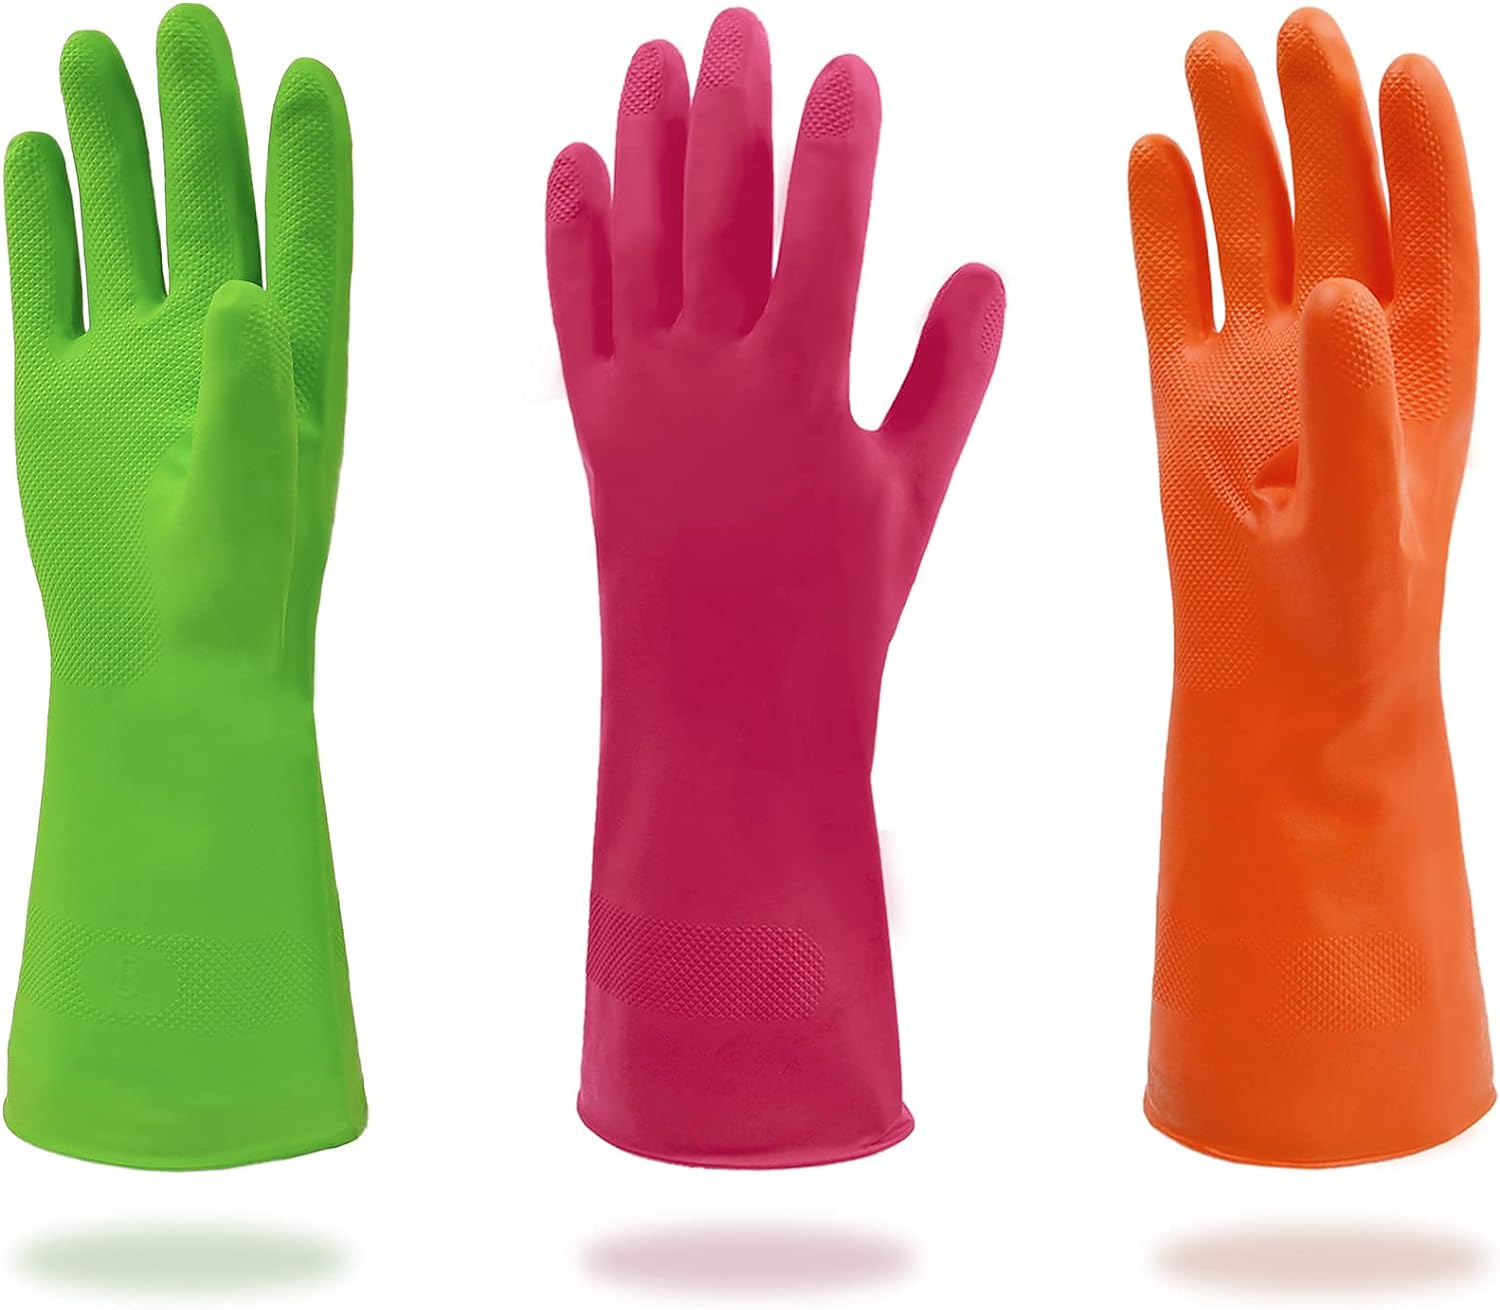 Cleanbear Household Cleaning Gloves Reusable Dish Washing Glove Set of 3